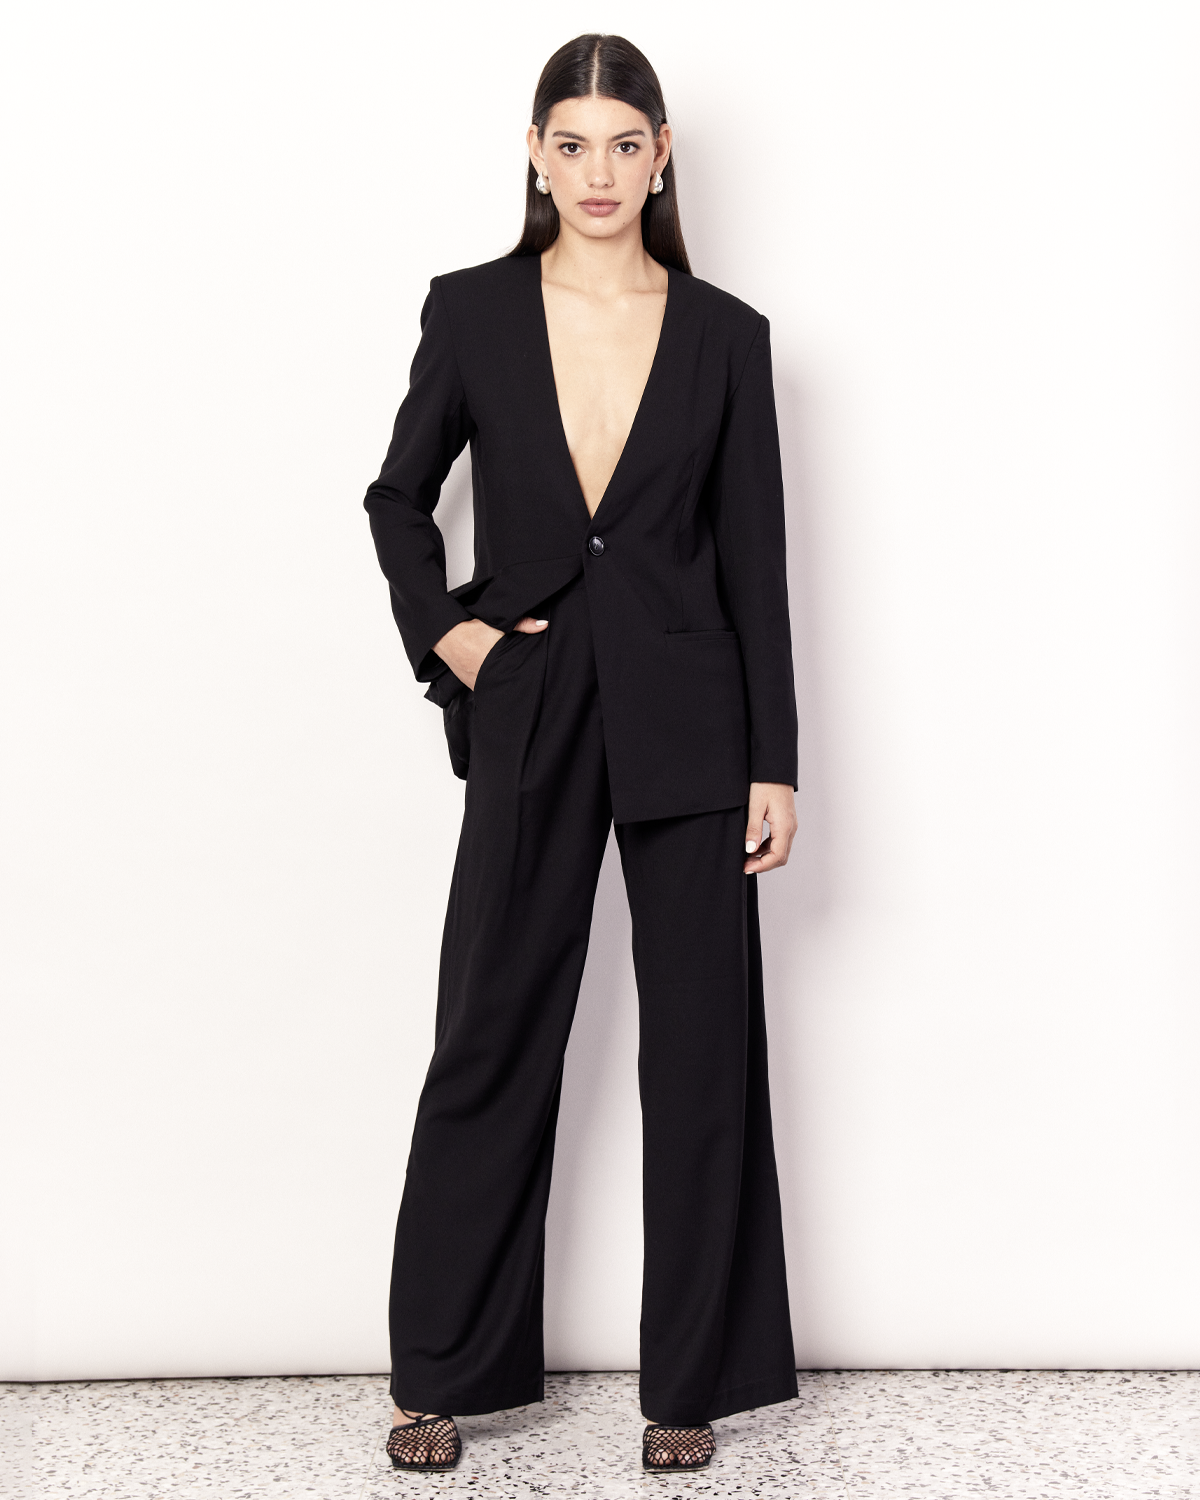 The Collarless Blazer is a versatile tailored silhouette featuring two front pockets, a button closure and a collarless neckline. It is fully lined and is crafted from a soft wool blend in Black. Now available at Romy. 